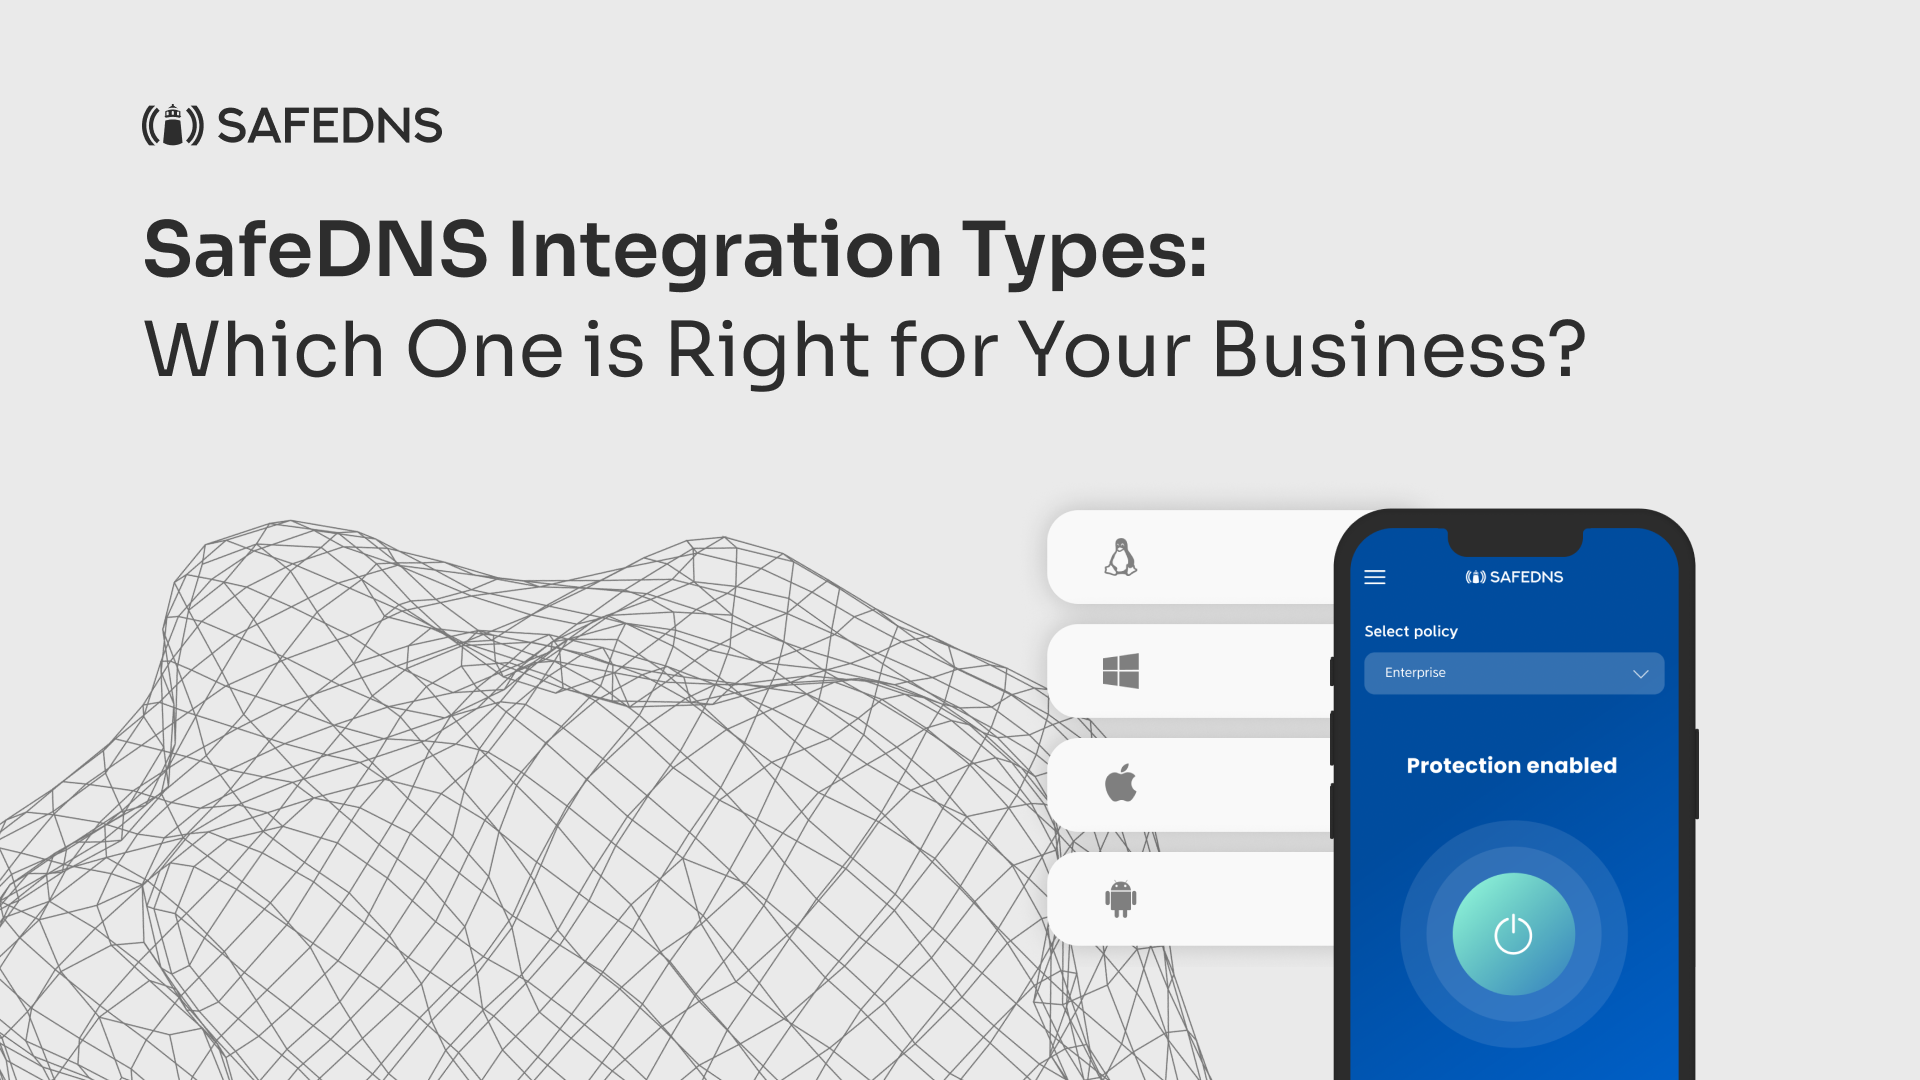 SafeDNS Integration Types: Which One is Right for Your Business?